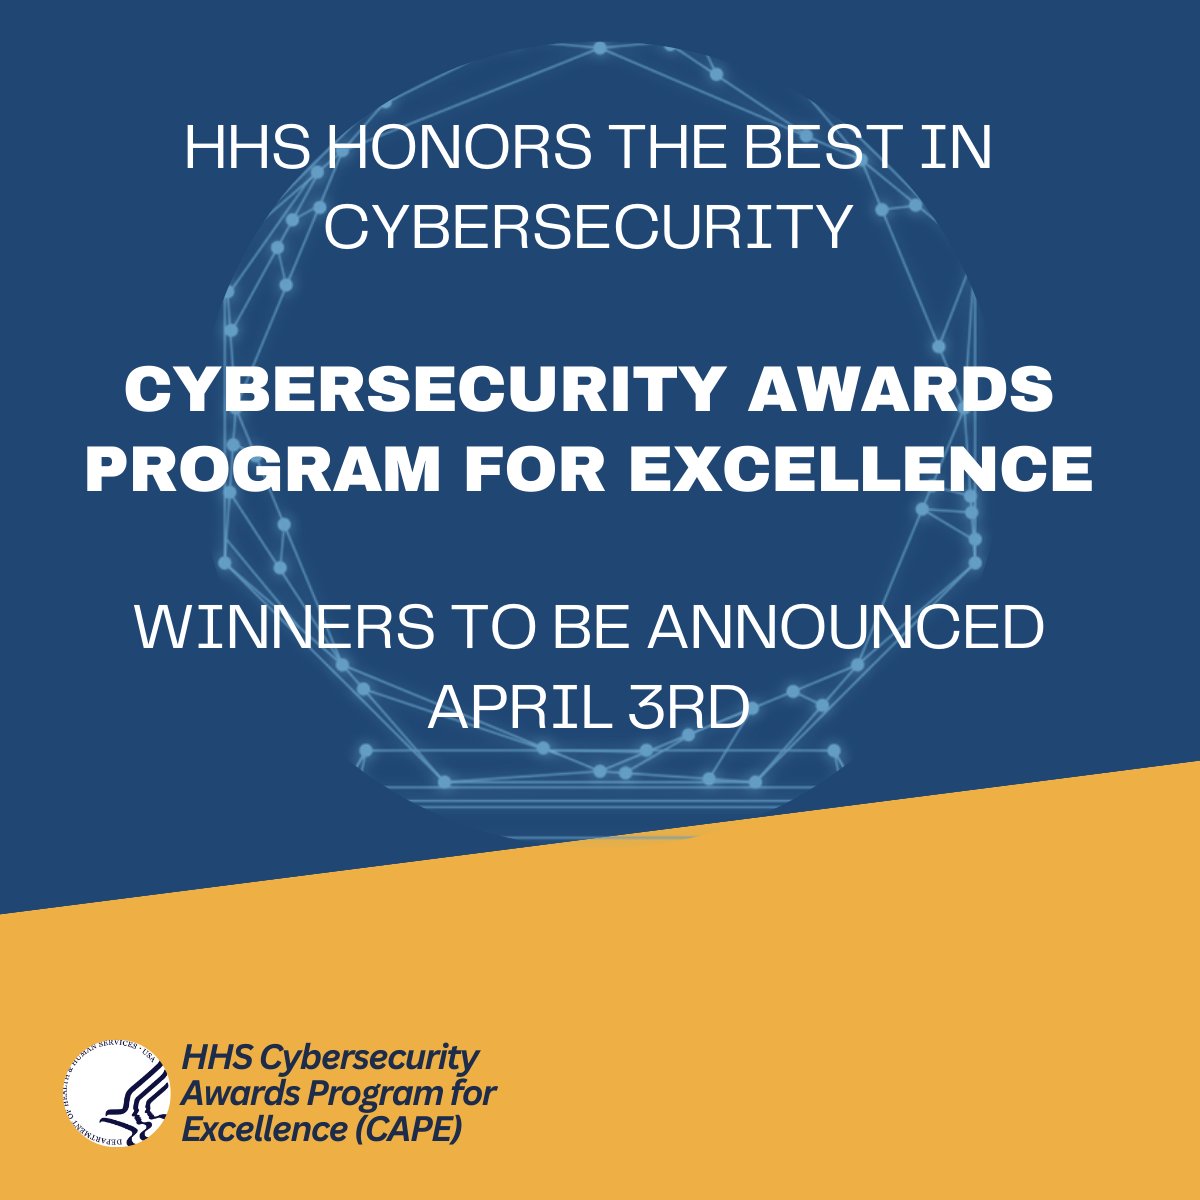 Tomorrow’s the day! ✨ Stay tuned for updates from the 2nd Annual HHS Cybersecurity Awards Program for Excellence (CAPE) Ceremony, as the five Departmental awards winners 🏆 will be announced tomorrow from Washington, D.C. #HHSCAPE #SecureOneHHS #HHSCybersecurity